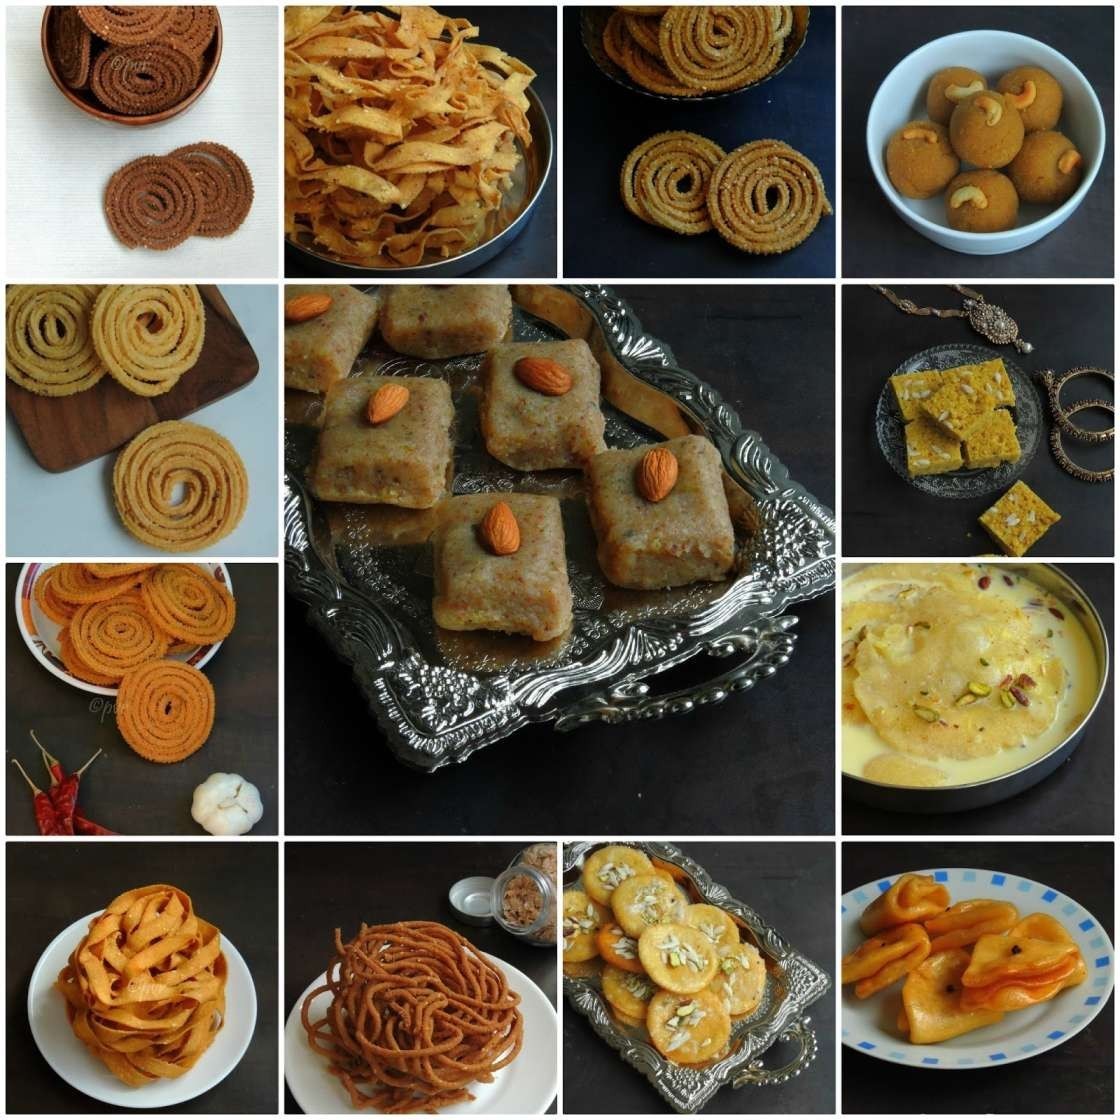 Buy Sweets and Snacks Online